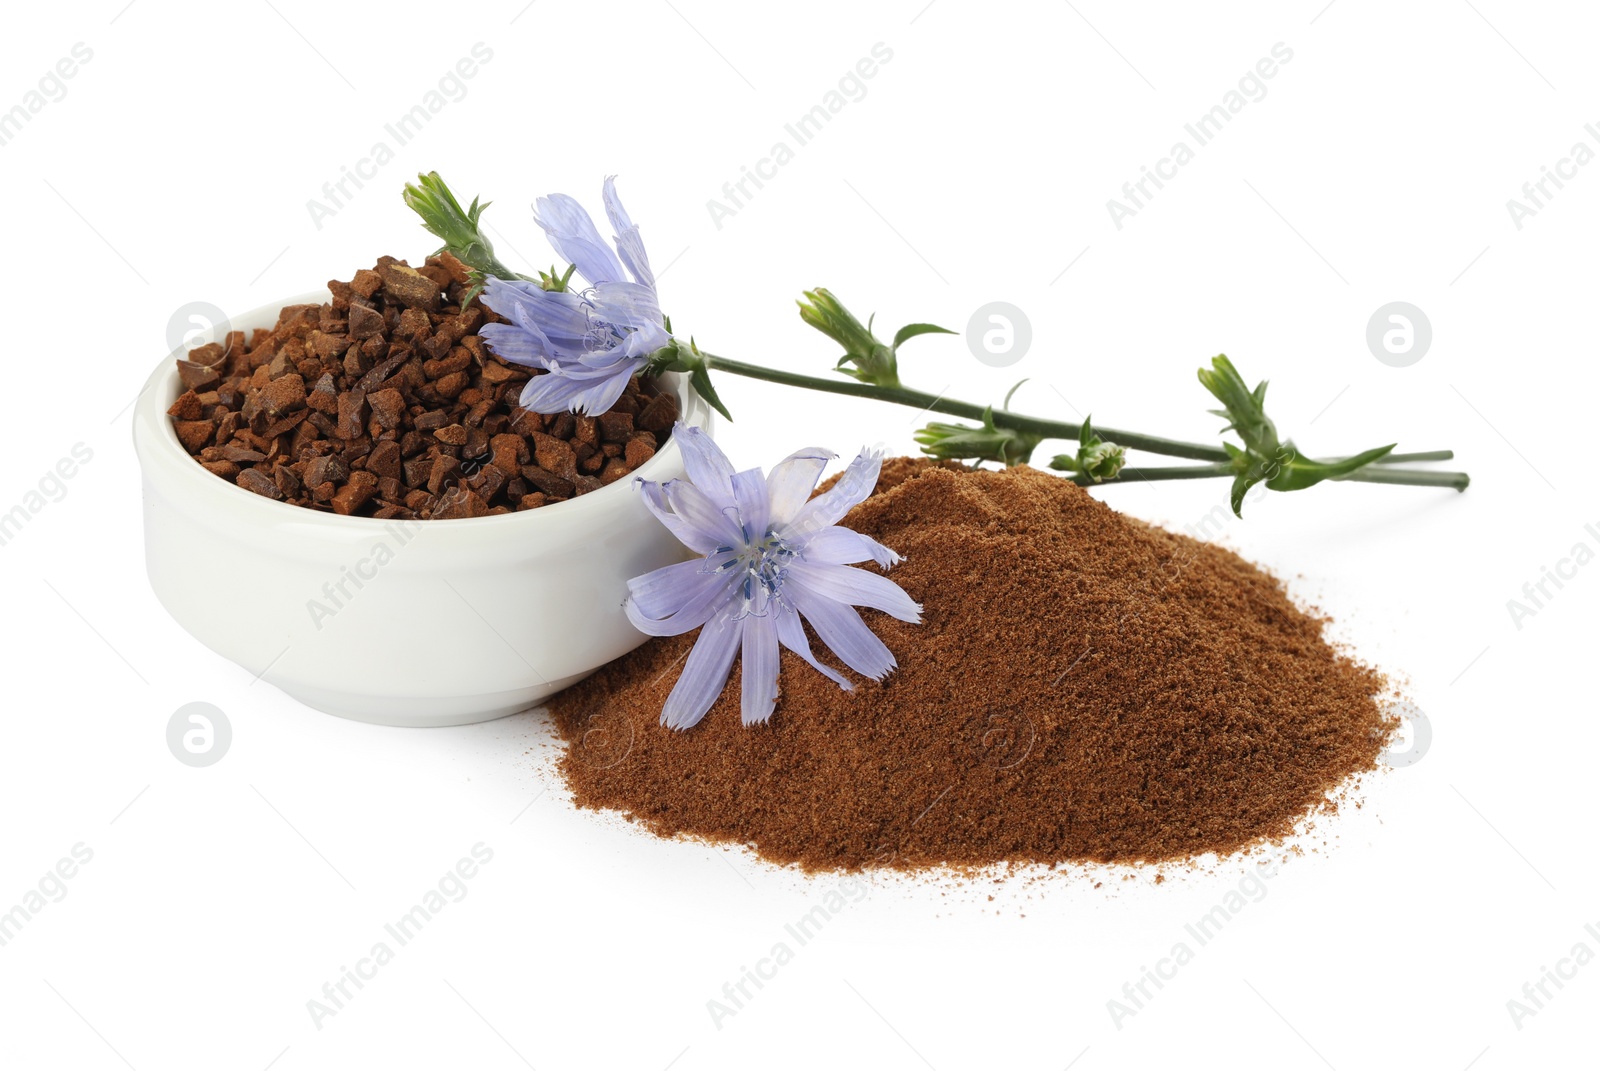 Photo of Chicory granules, powder and flowers on white background